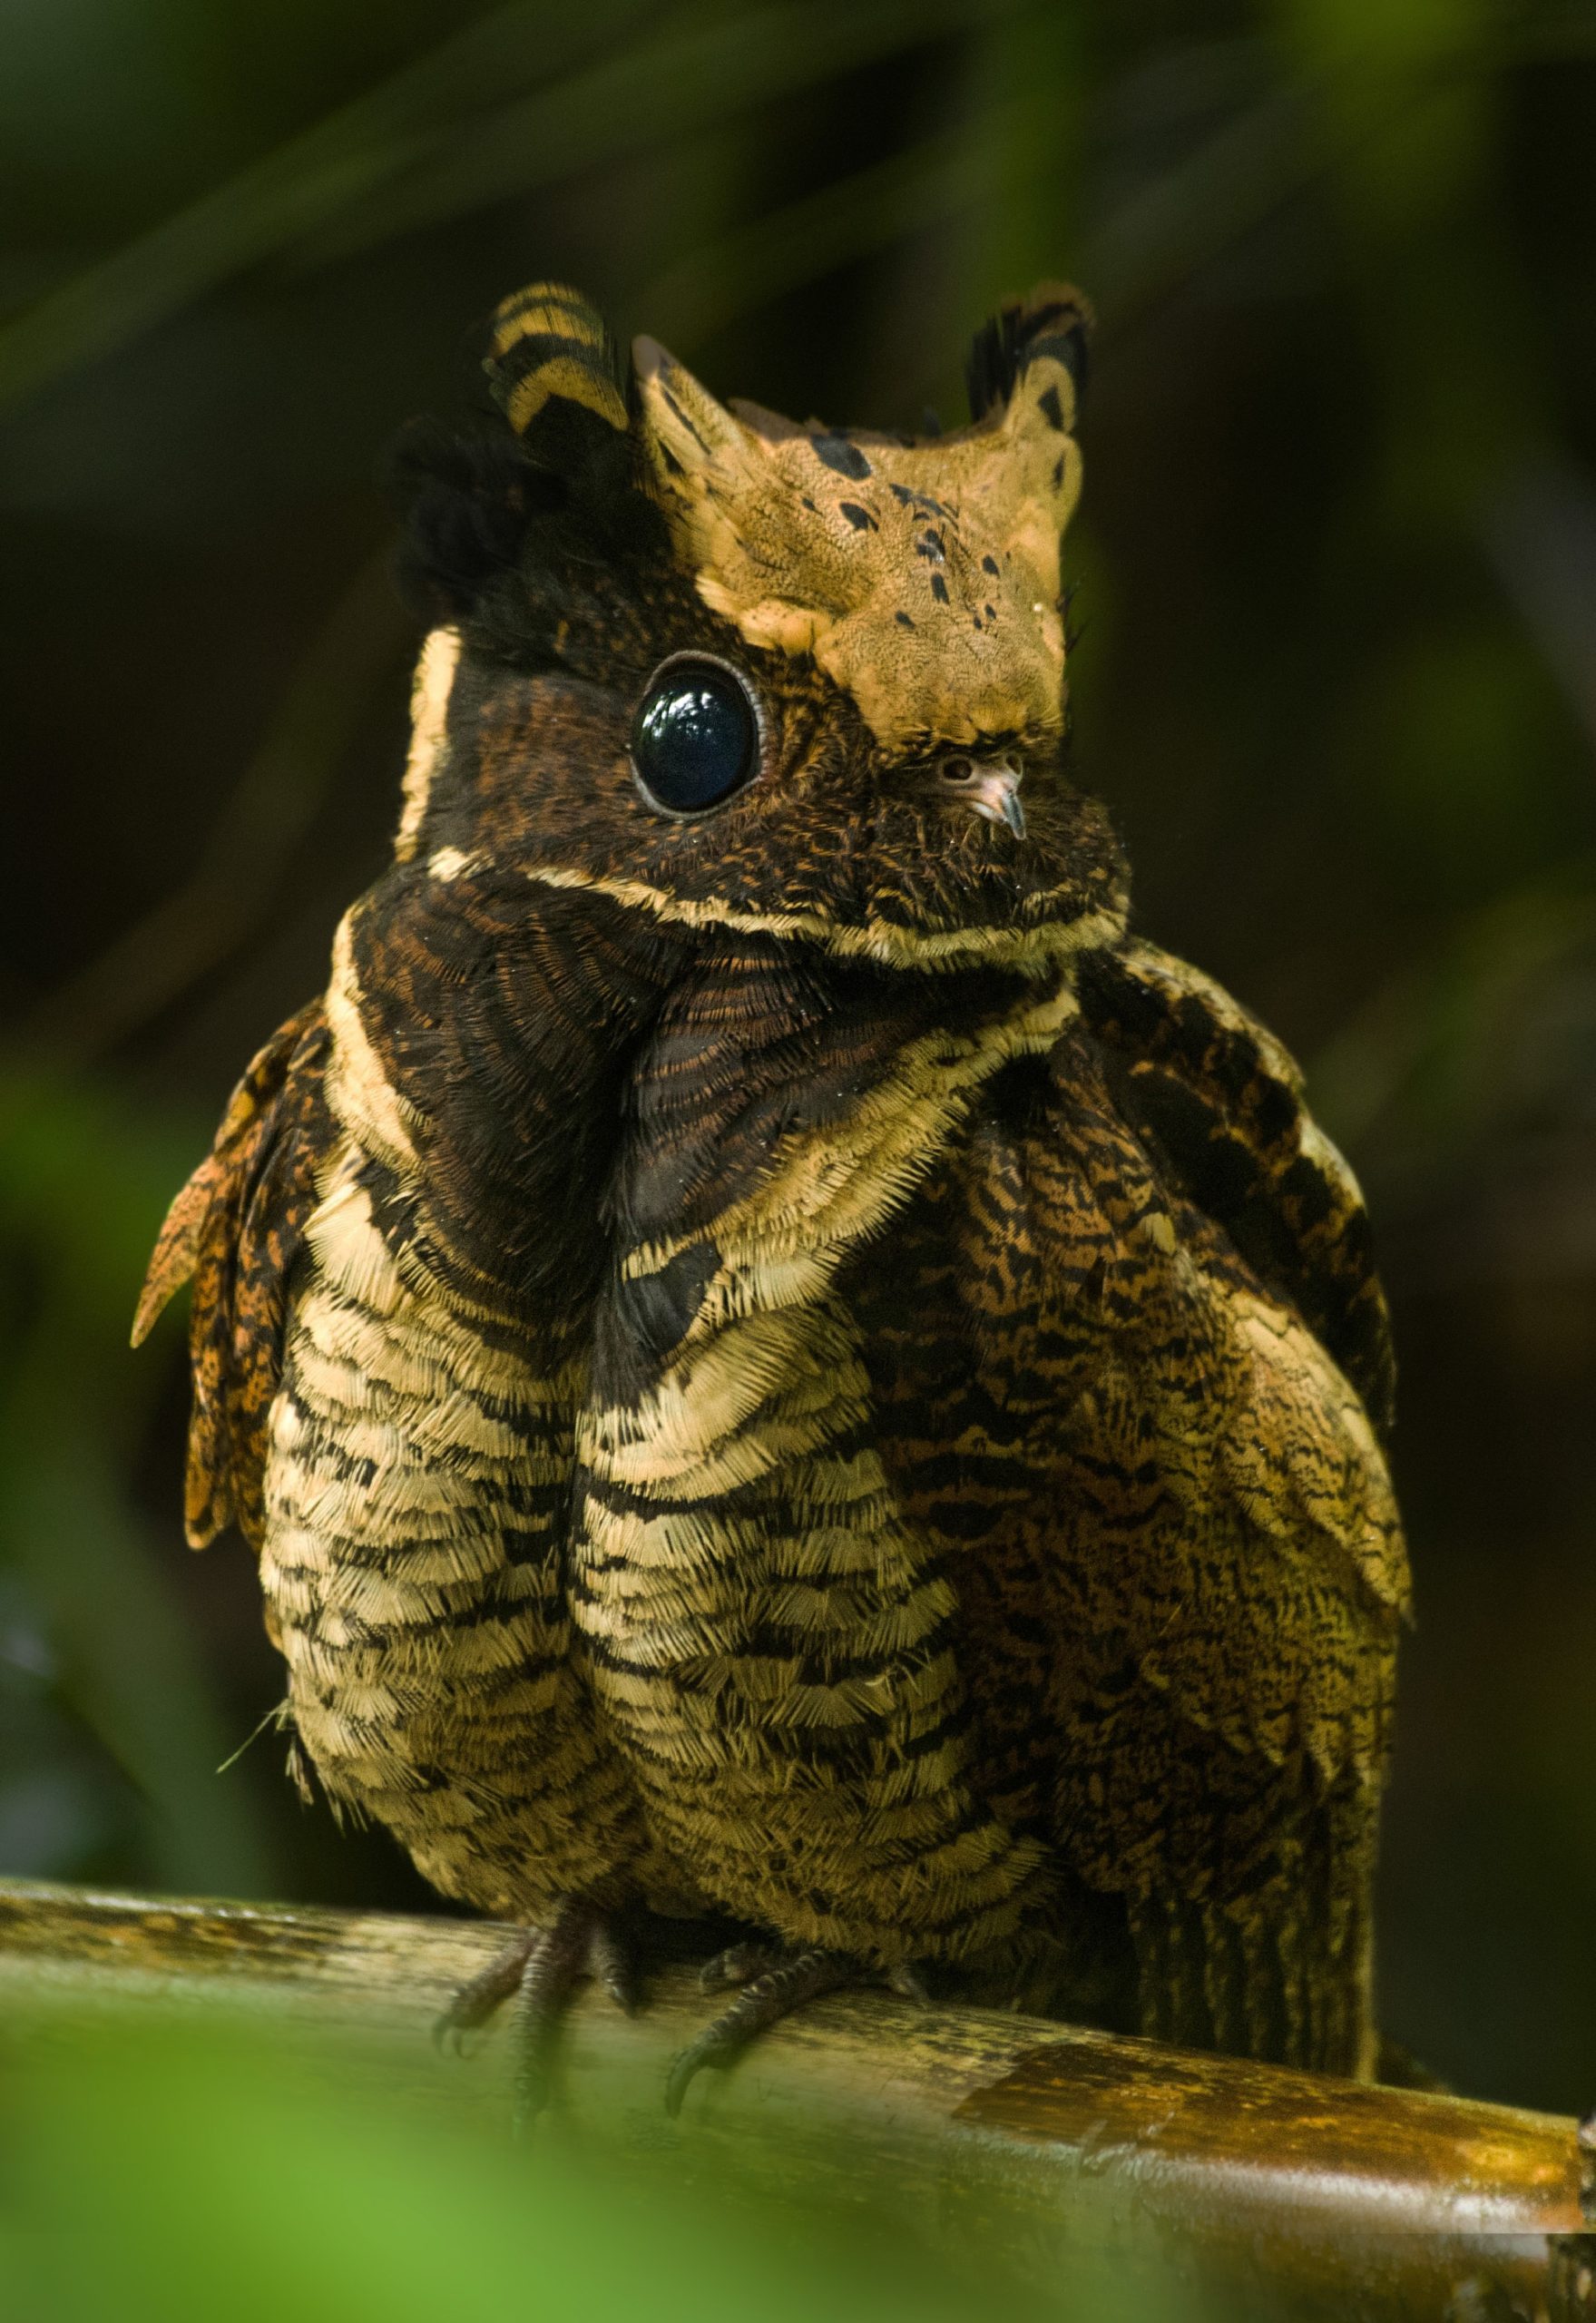 Can you have the great eared nightjar as a pet